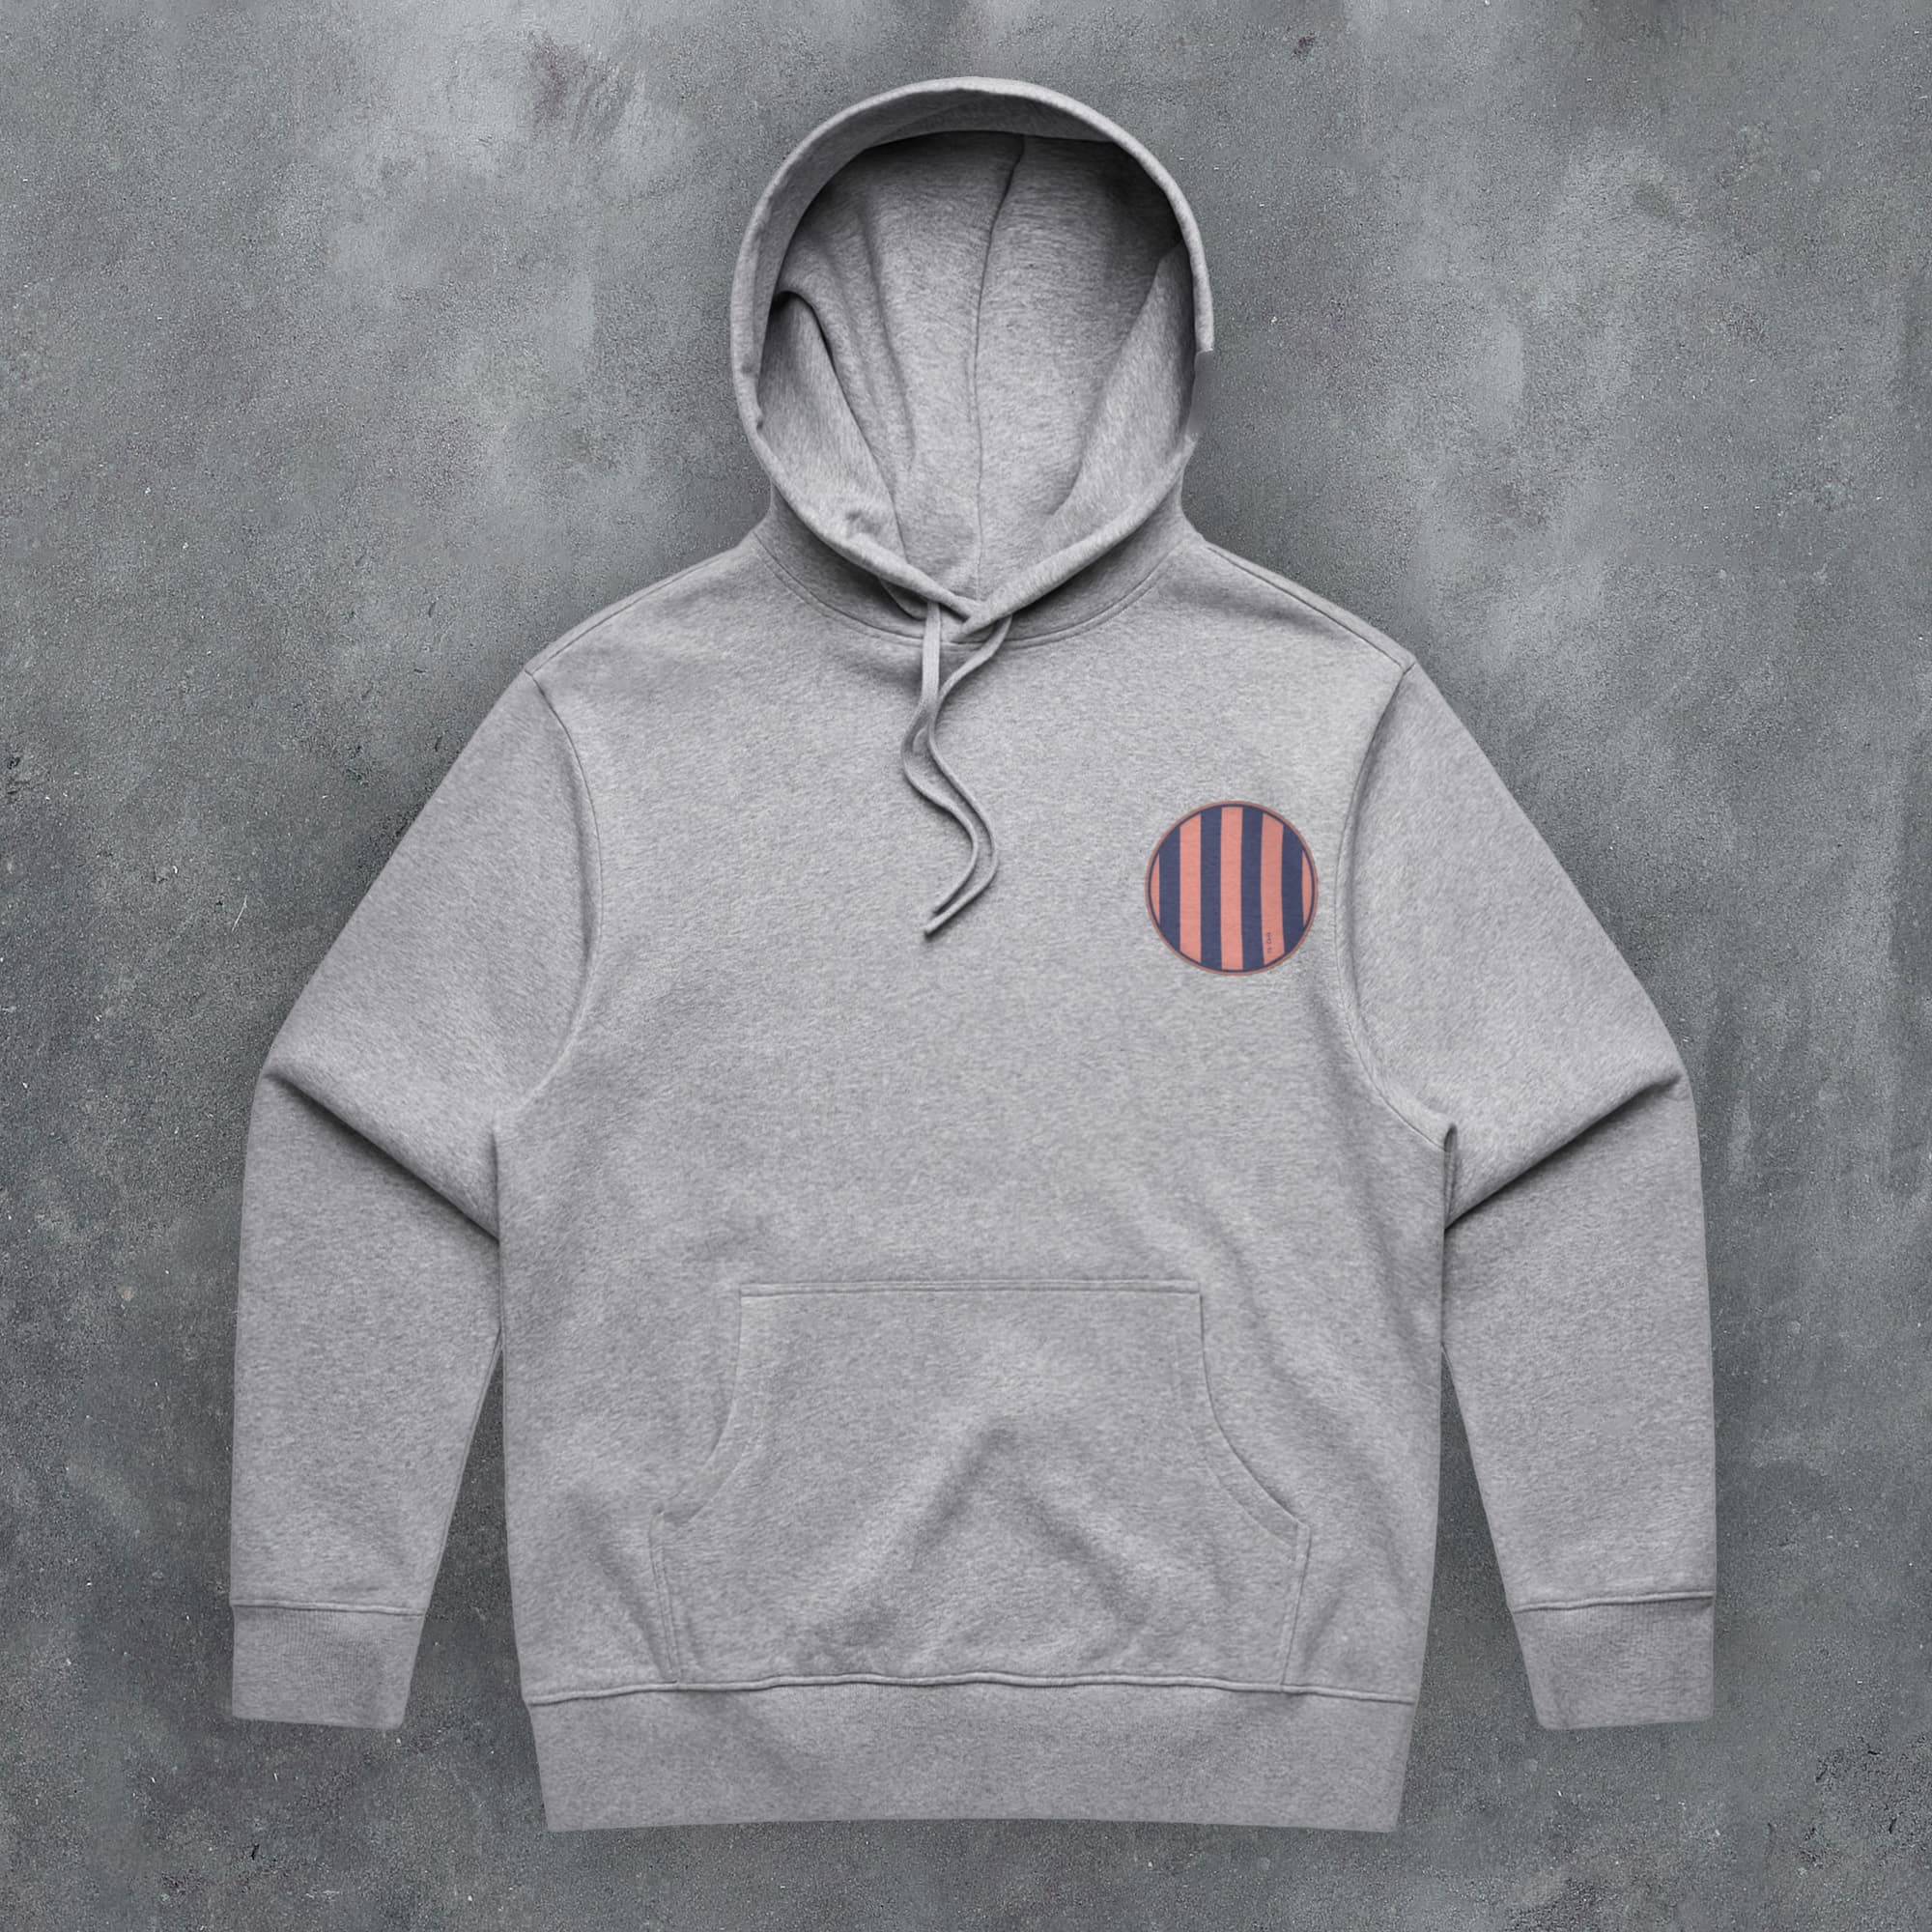 a grey hoodie with a striped patch on the chest